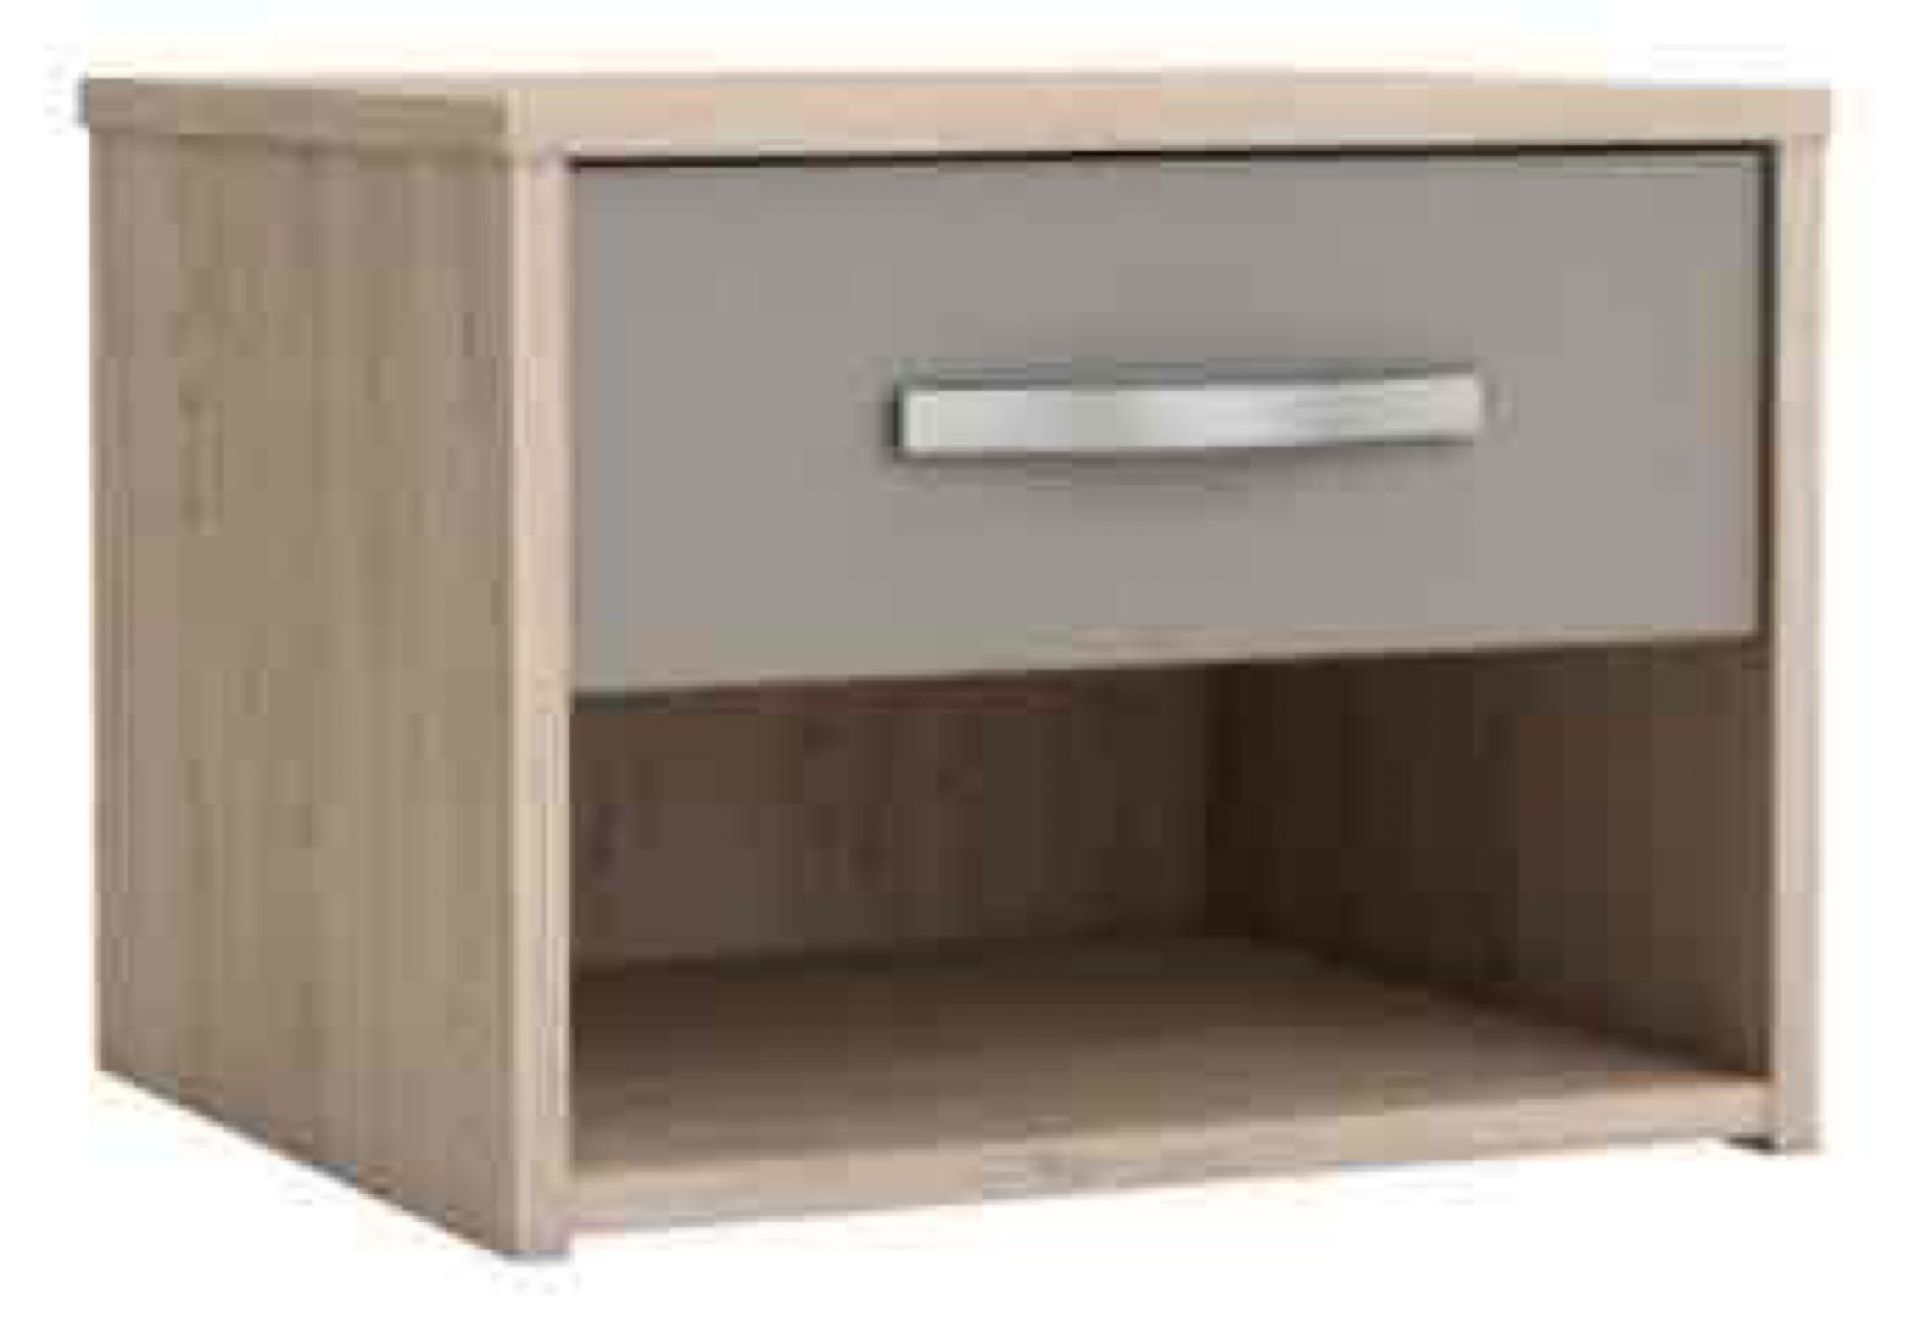 (Db) RRP £85 Lot To Contain One Boxed Magnum Bedside Cabinet In Arizona Oak And Clay With 2 Drawers.